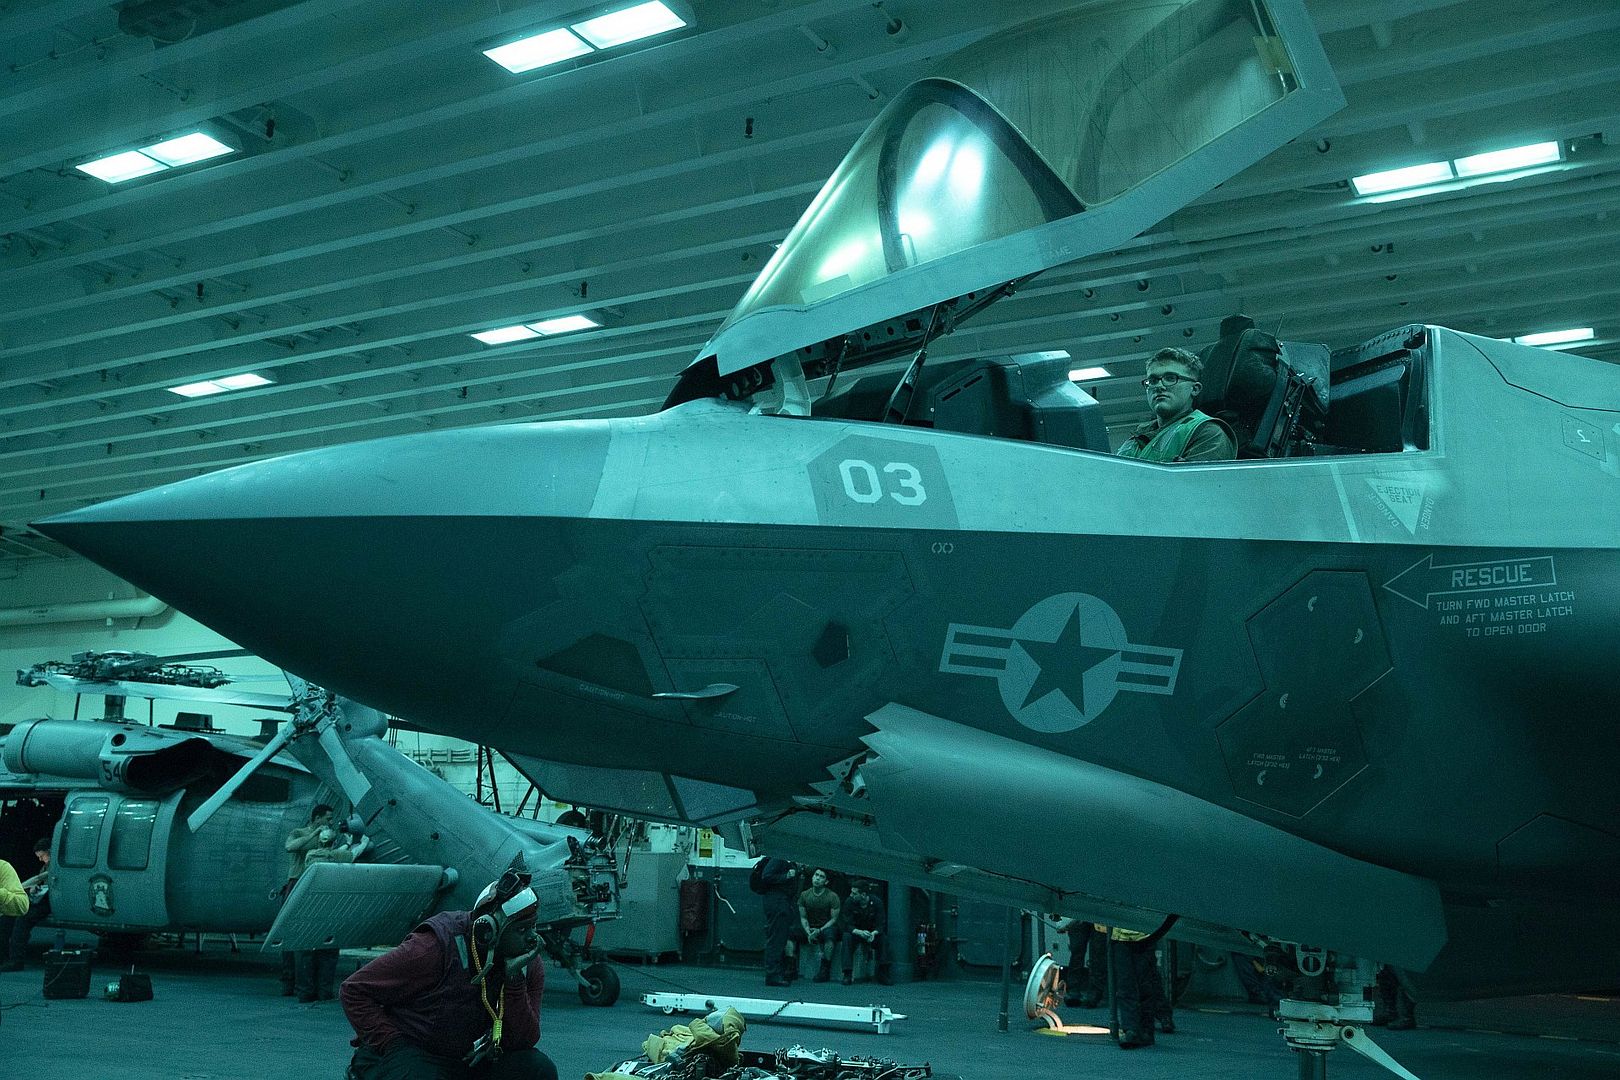 35B Lightning II Aircraft Assigned To Marine Strike Fighter Squadron 121 During A Move In The Hangar Bay Aboard Amphibious Assault Carrier USS Tripoli